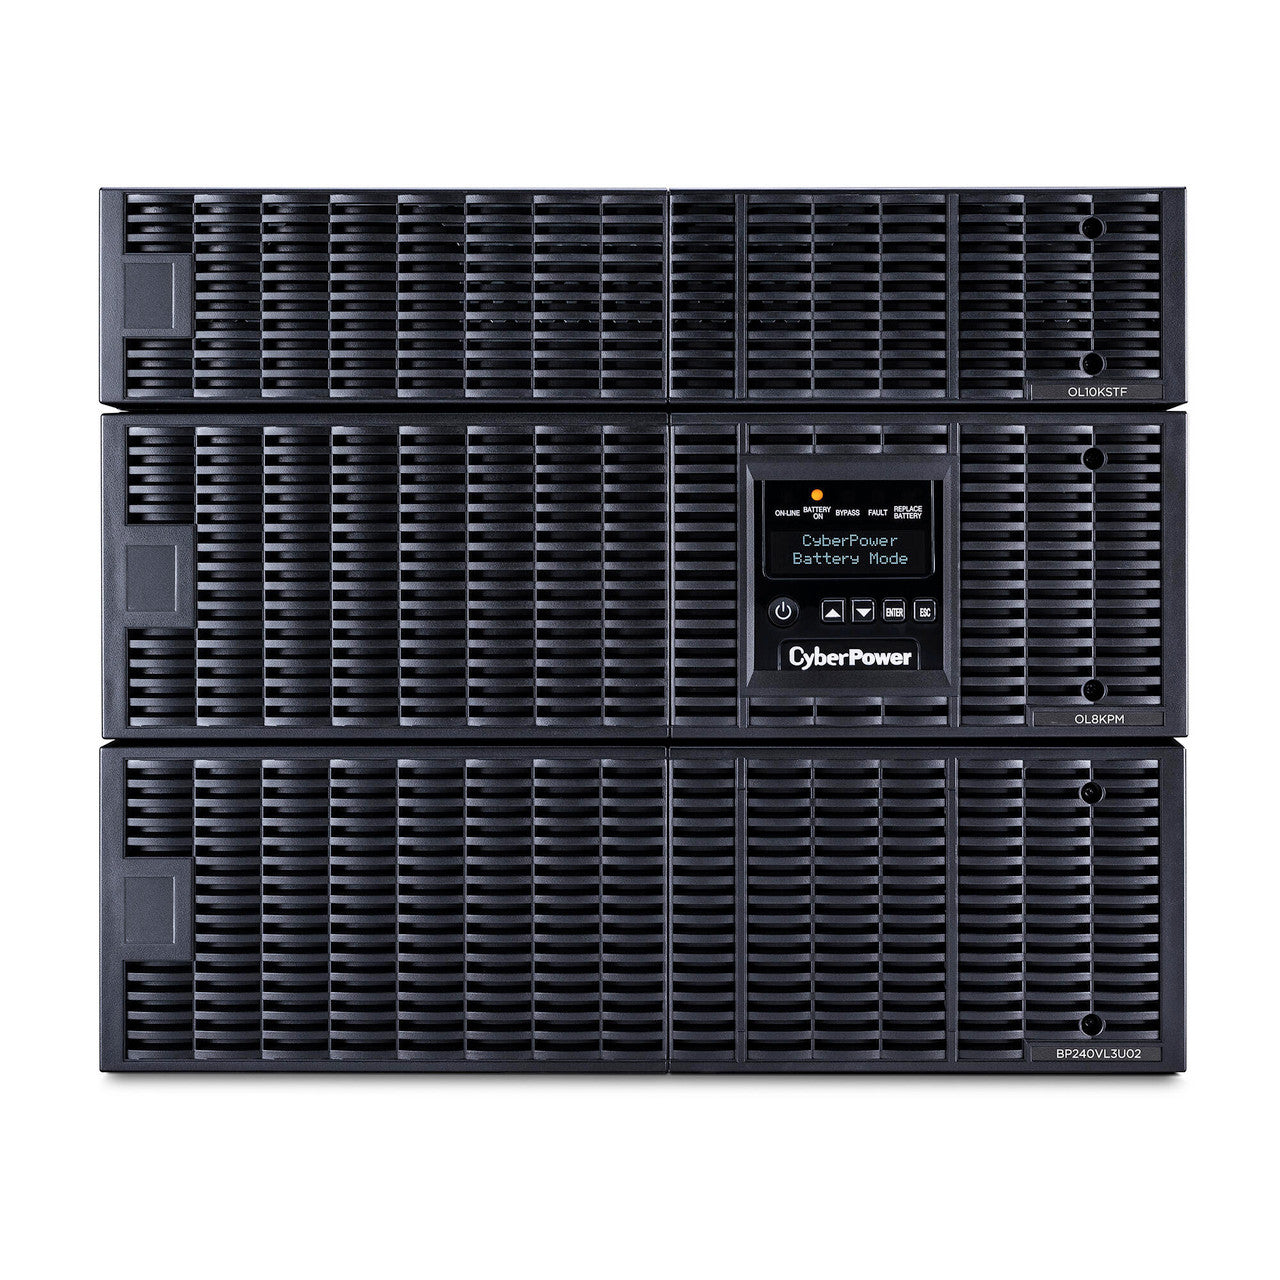 CyberPower OL8KRTF 8KVA/8KW, online double-conversion UPS, 10KW step-down transformer included